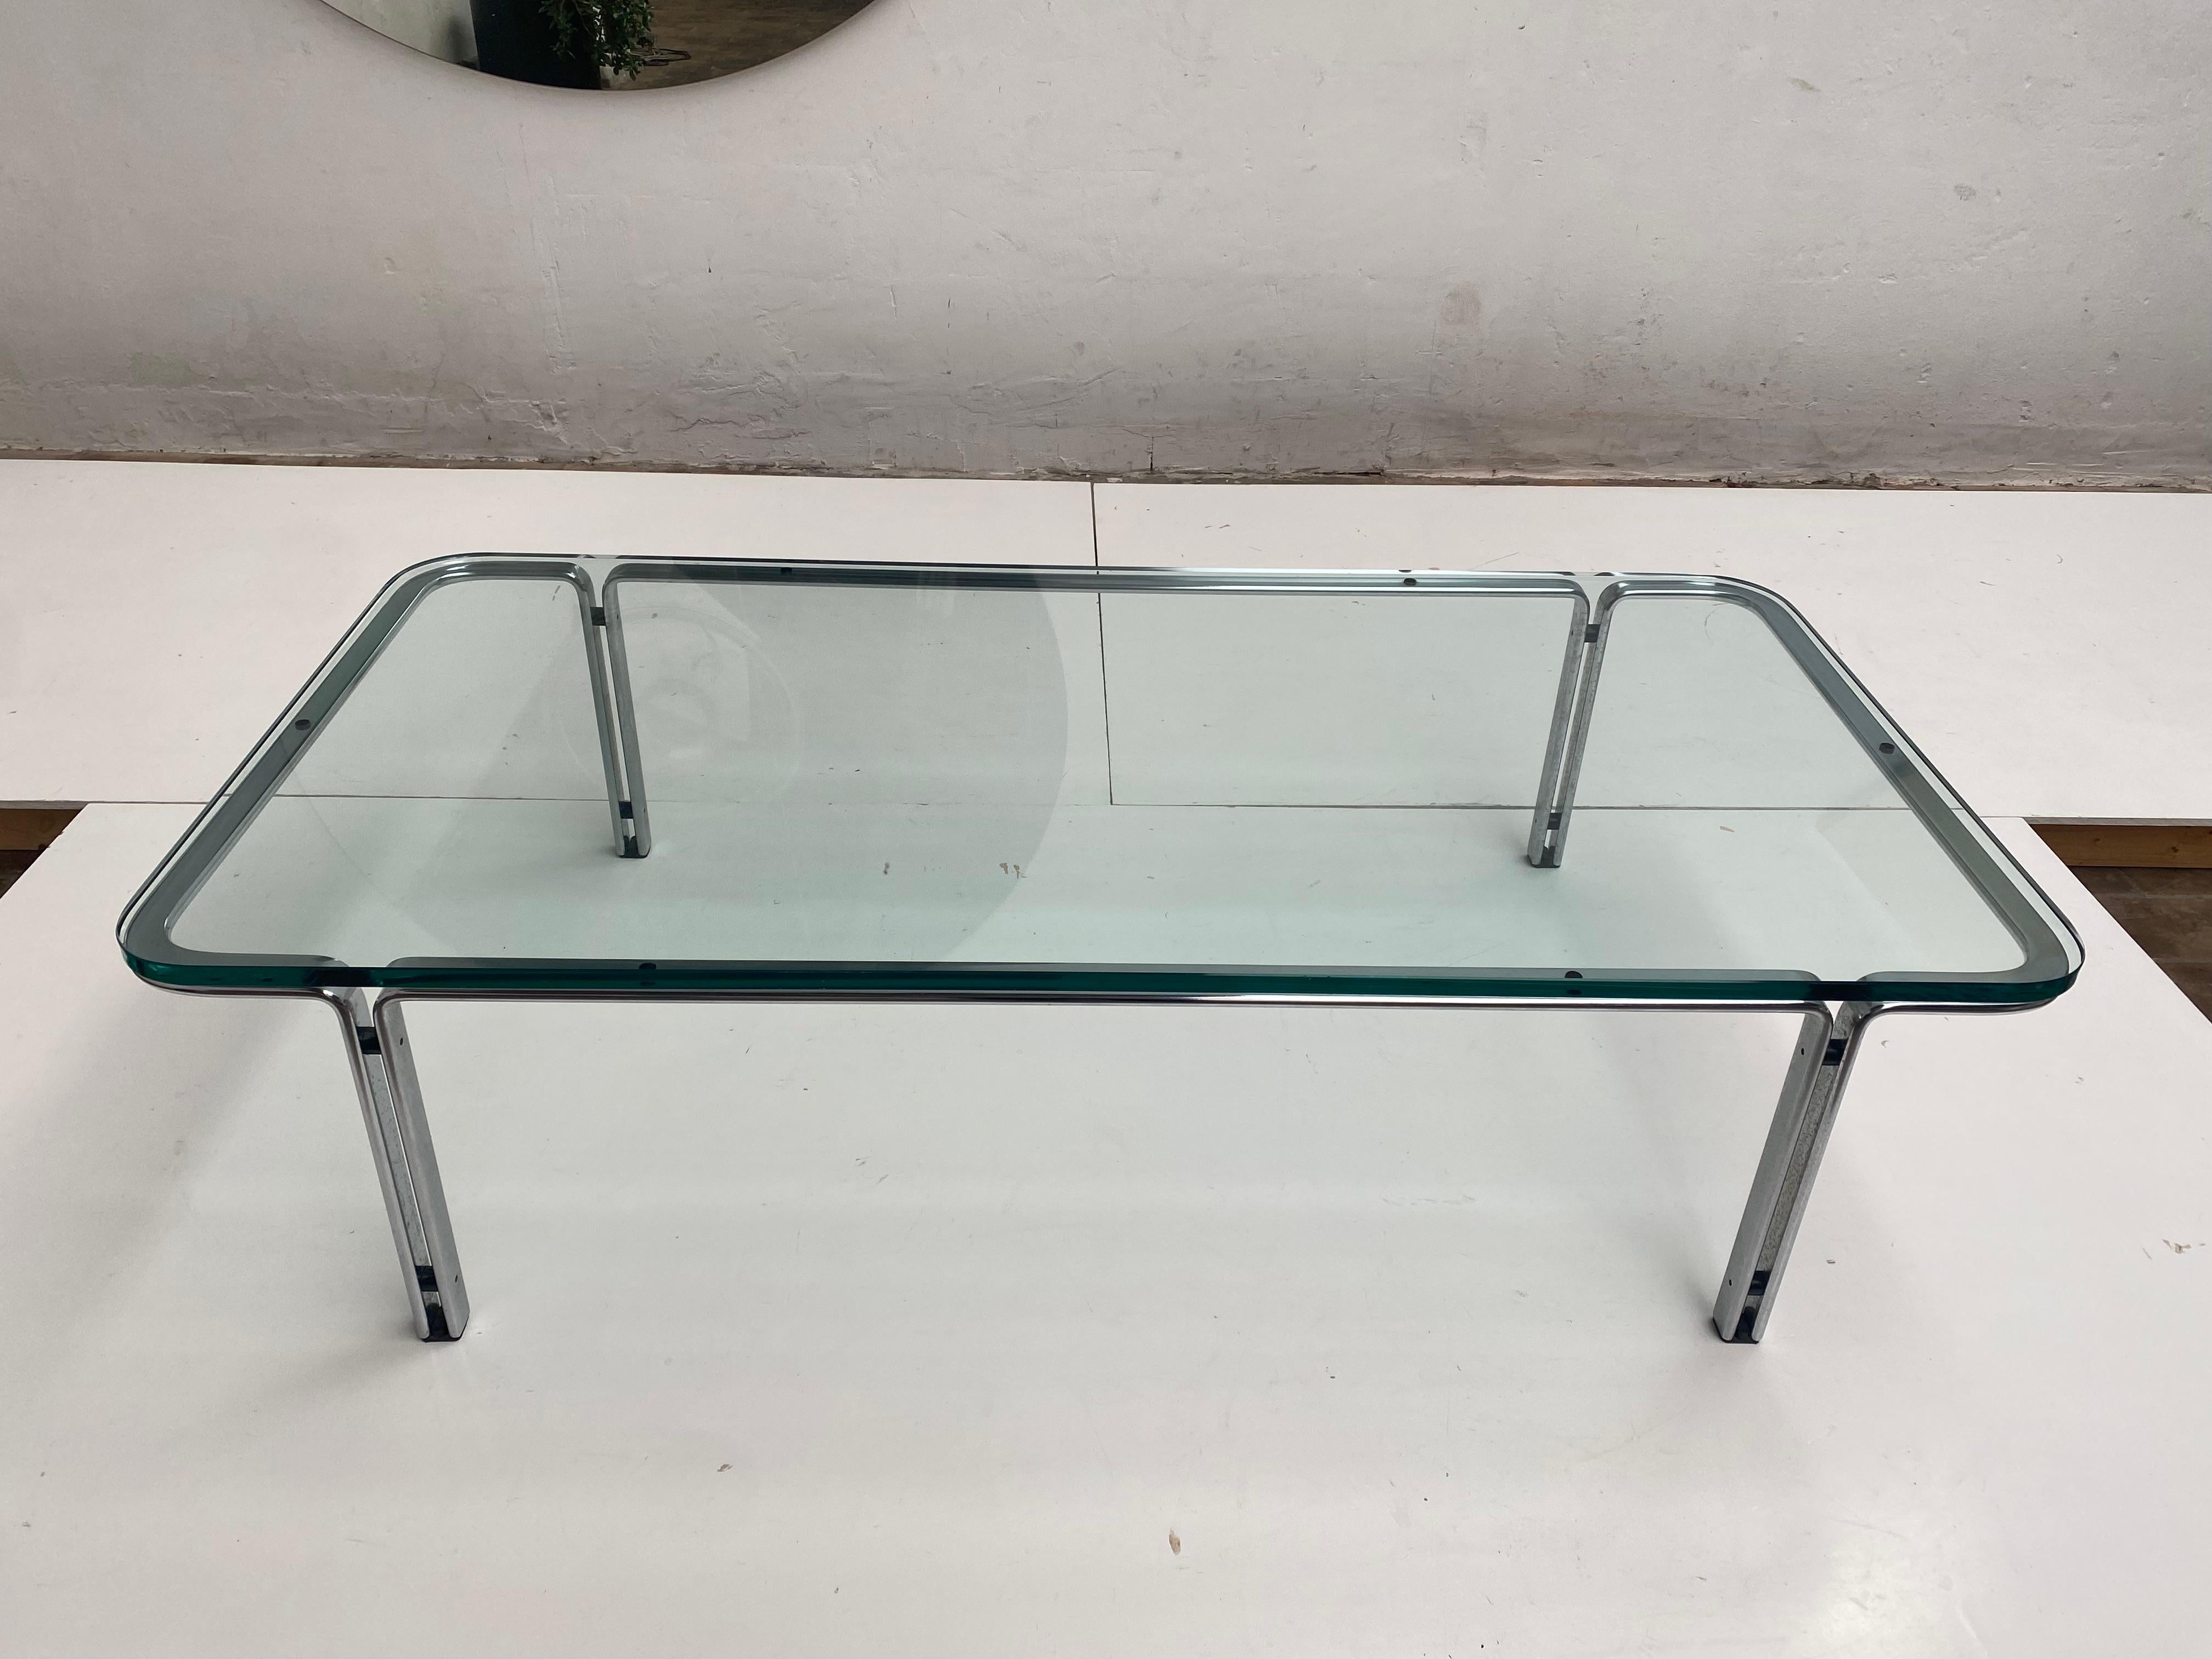 T112 Rectangular Coffee table by Horst Brüning for Alfred Kill International Circa 1970

Very nice original vintage condition, the glass has a few minuscule chips to the edge that are not visible 

Nice and honest example

The Nickel plated steel